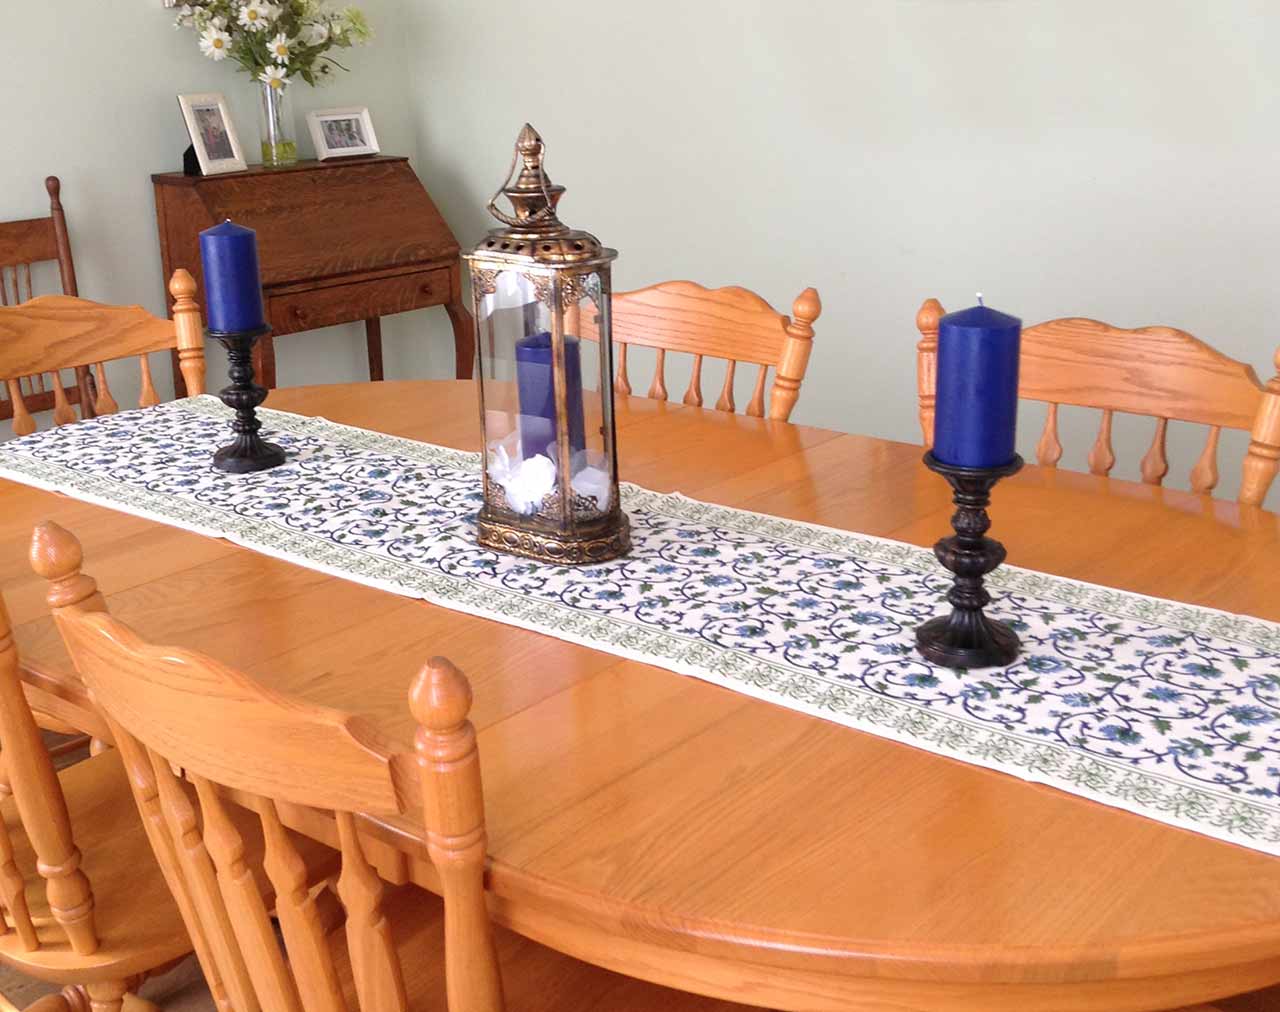 Indian table runner with blue and white